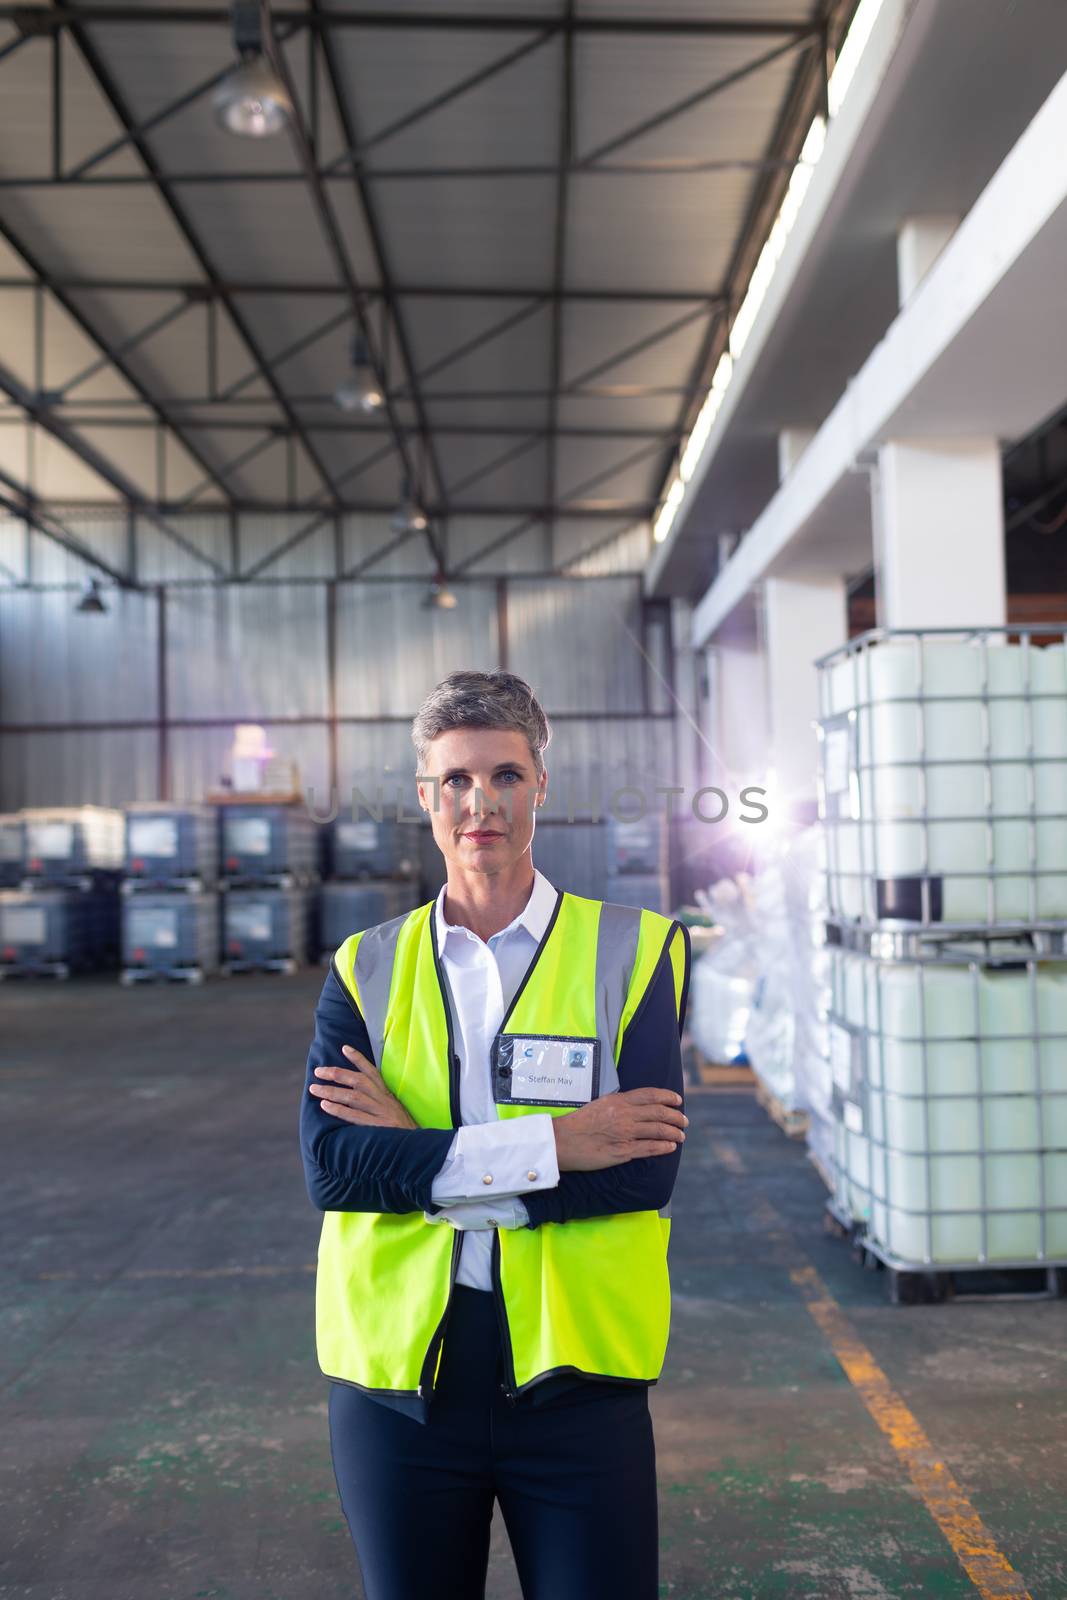 Portrait of Caucasian mature female staff in reflective jacket standing with arms crossed in warehouse. This is a freight transportation and distribution warehouse. Industrial and industrial workers concept